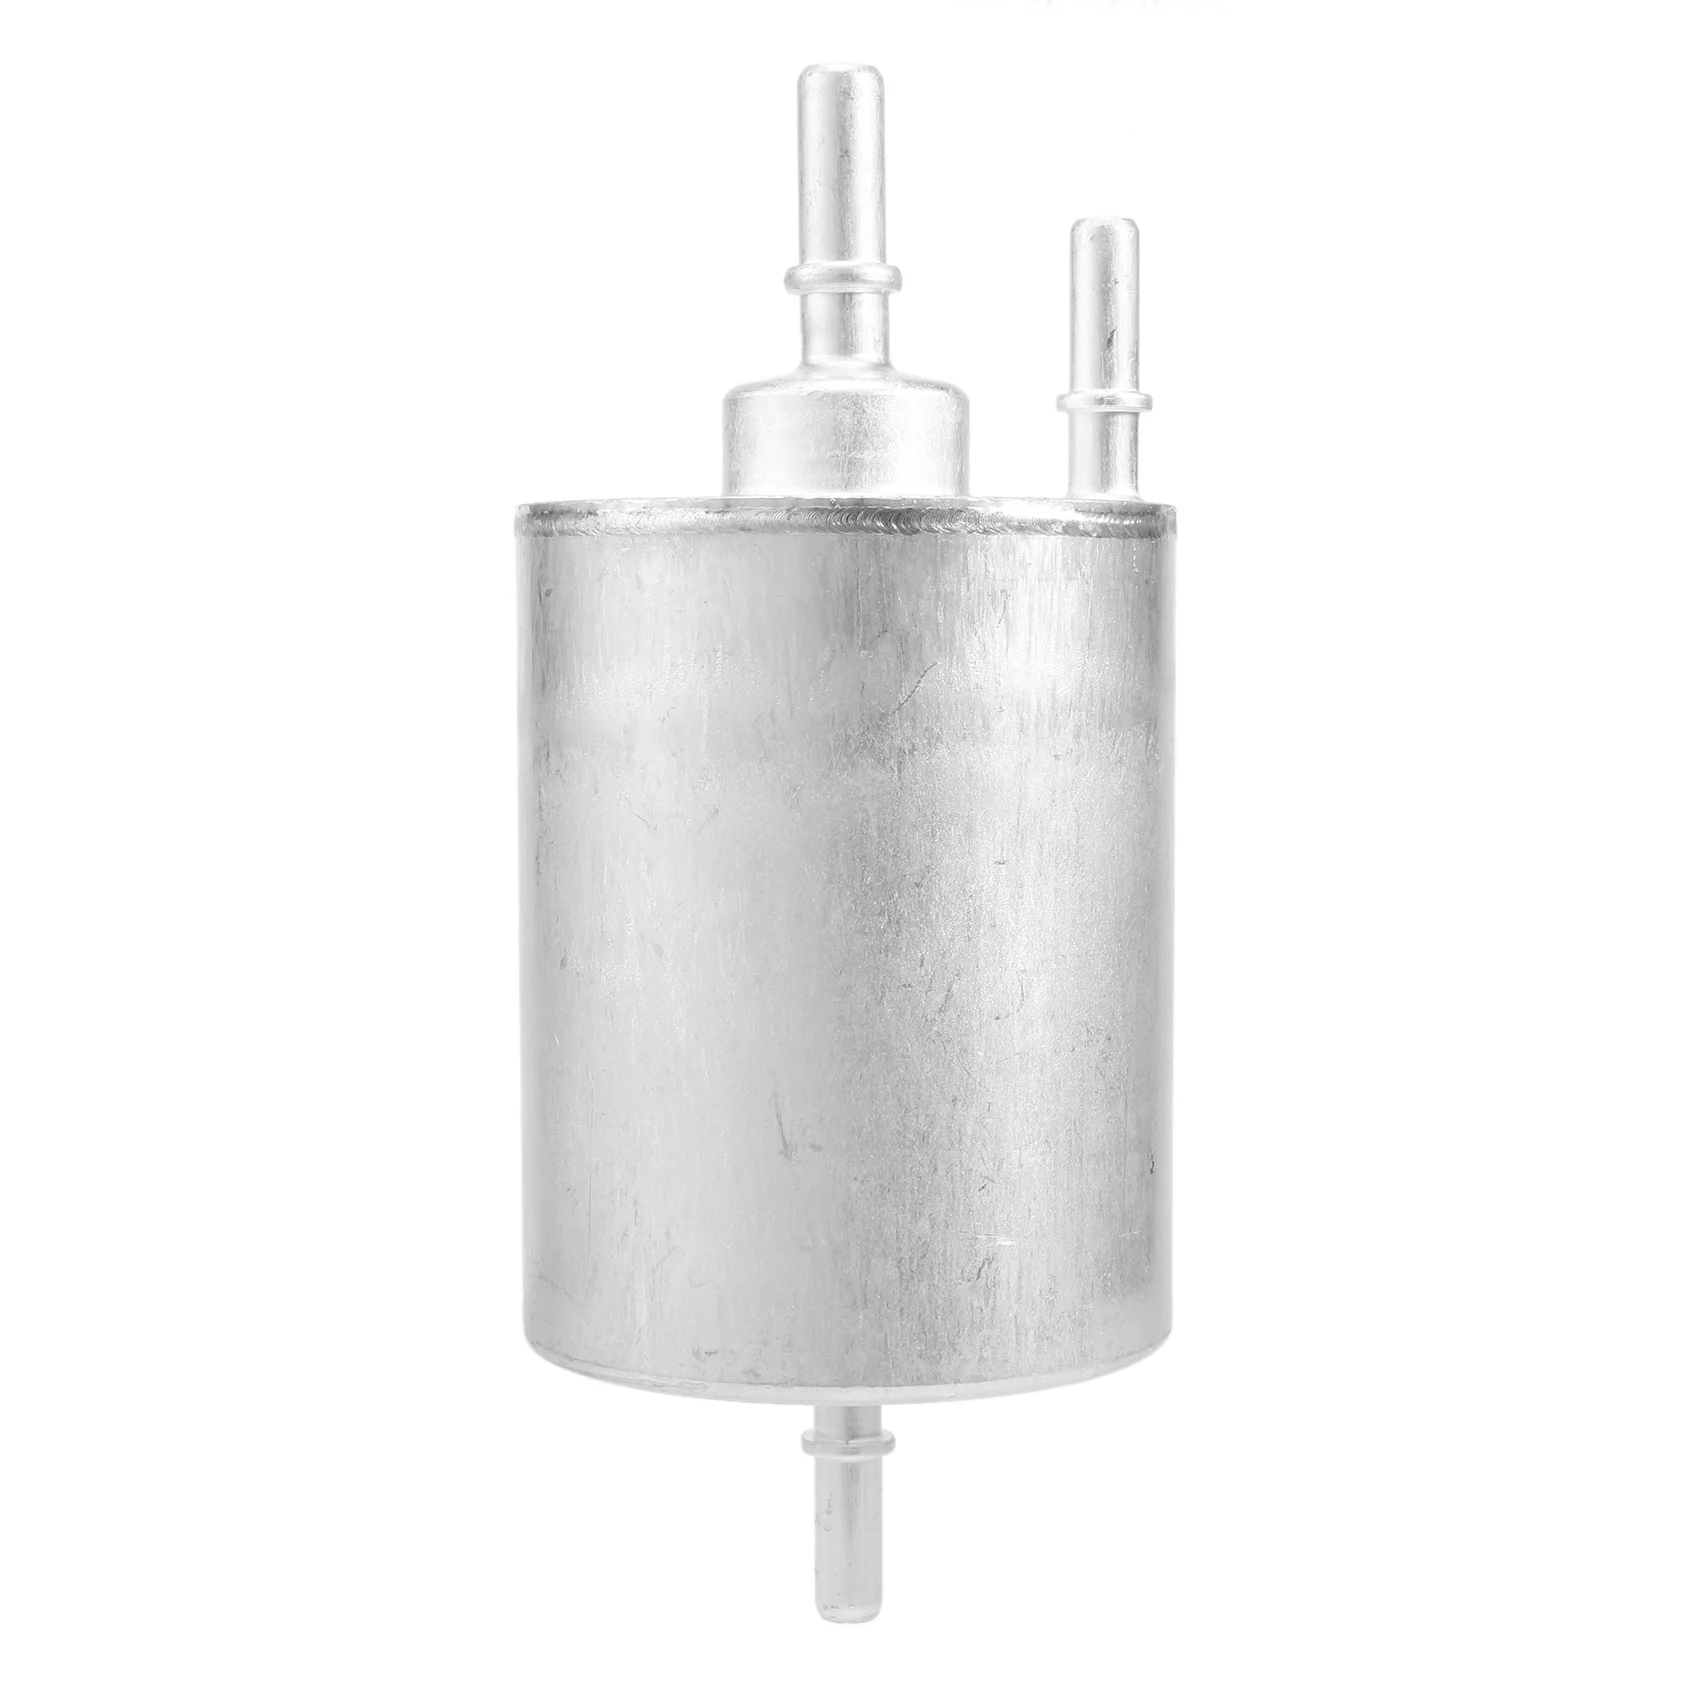 

4F0201511C Fuel Filter for Audi A6L 2.0T / 2.8FSI / 3.0L / 3.0TFSI / 3.2L / 4.2L Audi A4 2.0T / R8 / A8 SEAT EXEO